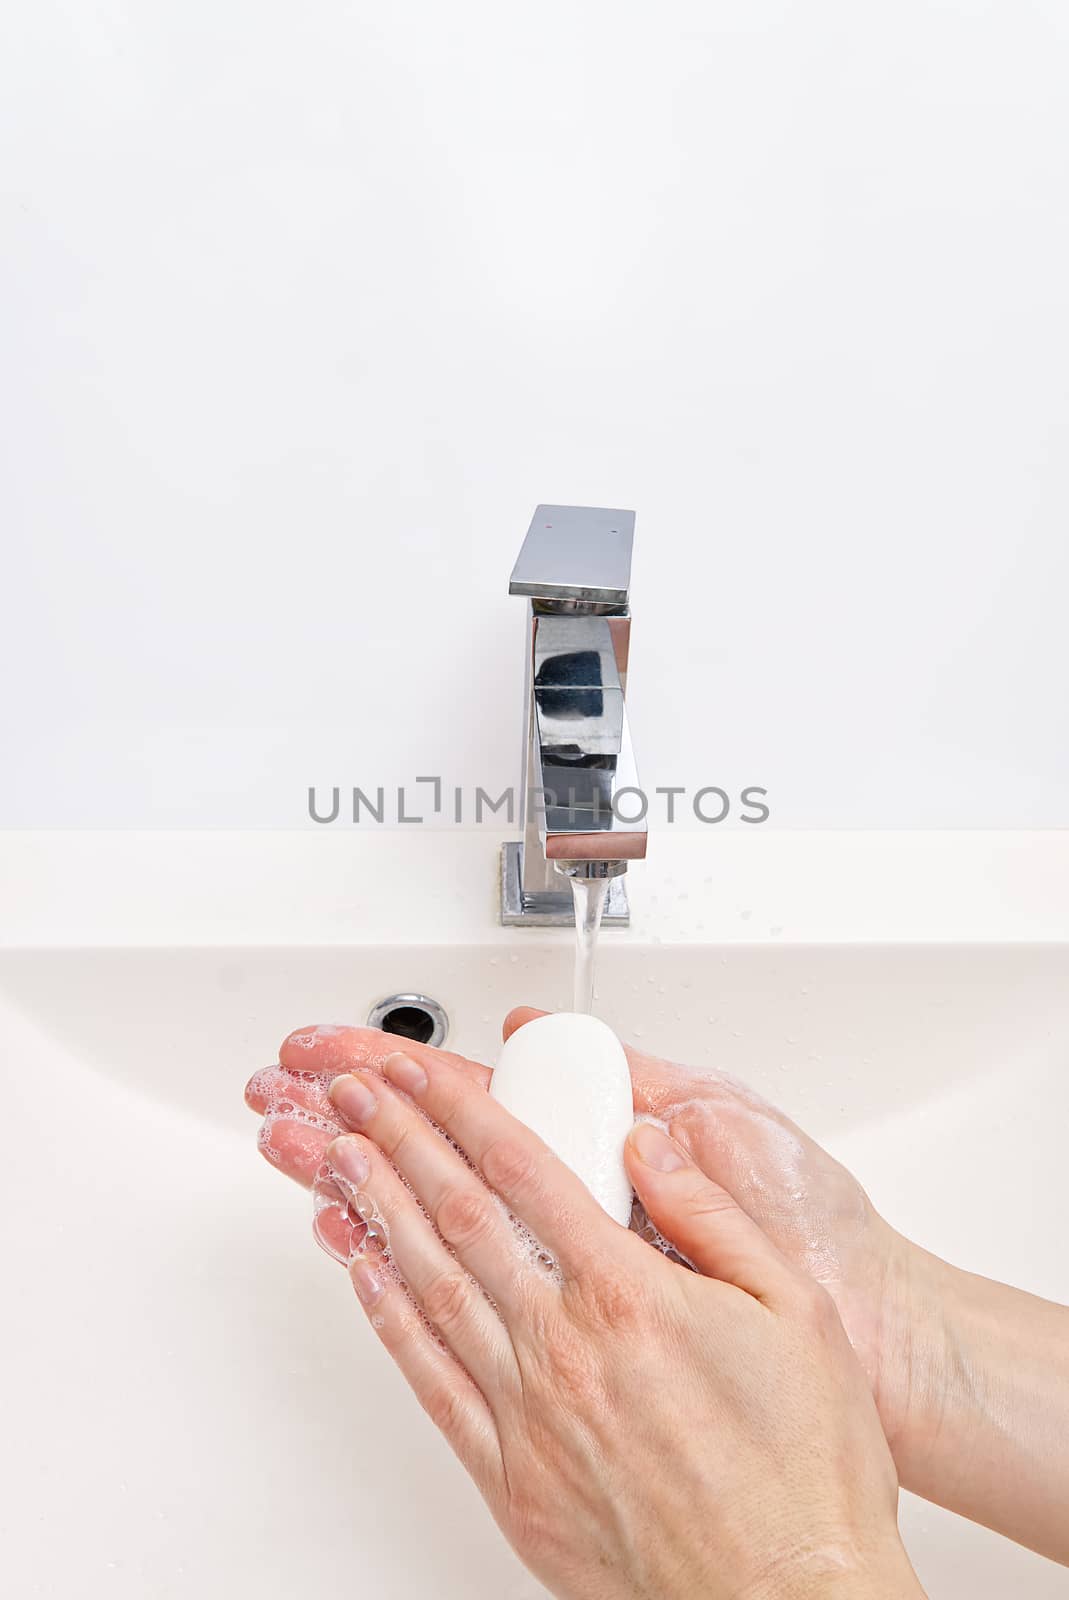 antibacterial soap in the hands. soapy hands. Wash hands with soap and water. Coronavirus Prevention, COVID-19, The concept of virus protection during the coronavirus epidemic